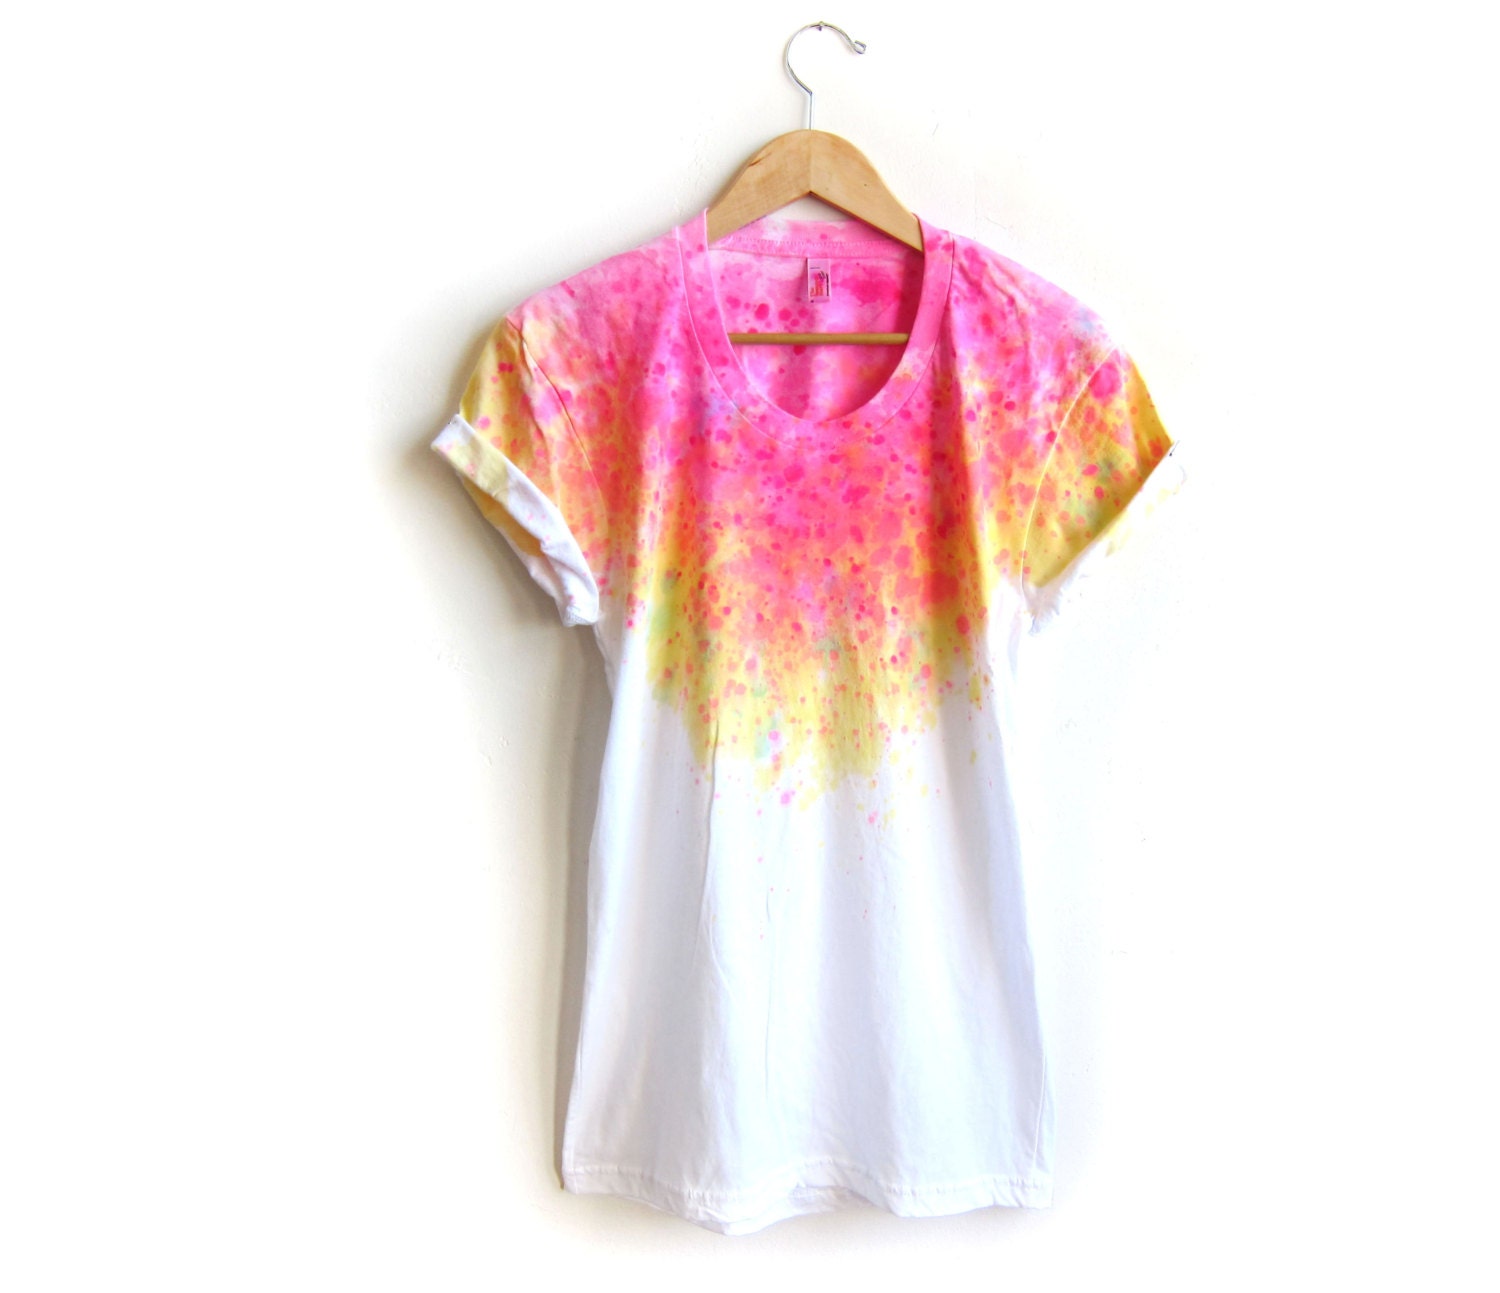 The Original "Splash Dyed" Hand PAINTED Scoop Neck Pinned Rolled Cuffs Tee in White Spectrum Acid Pink - S M L XL 2XL 3XL